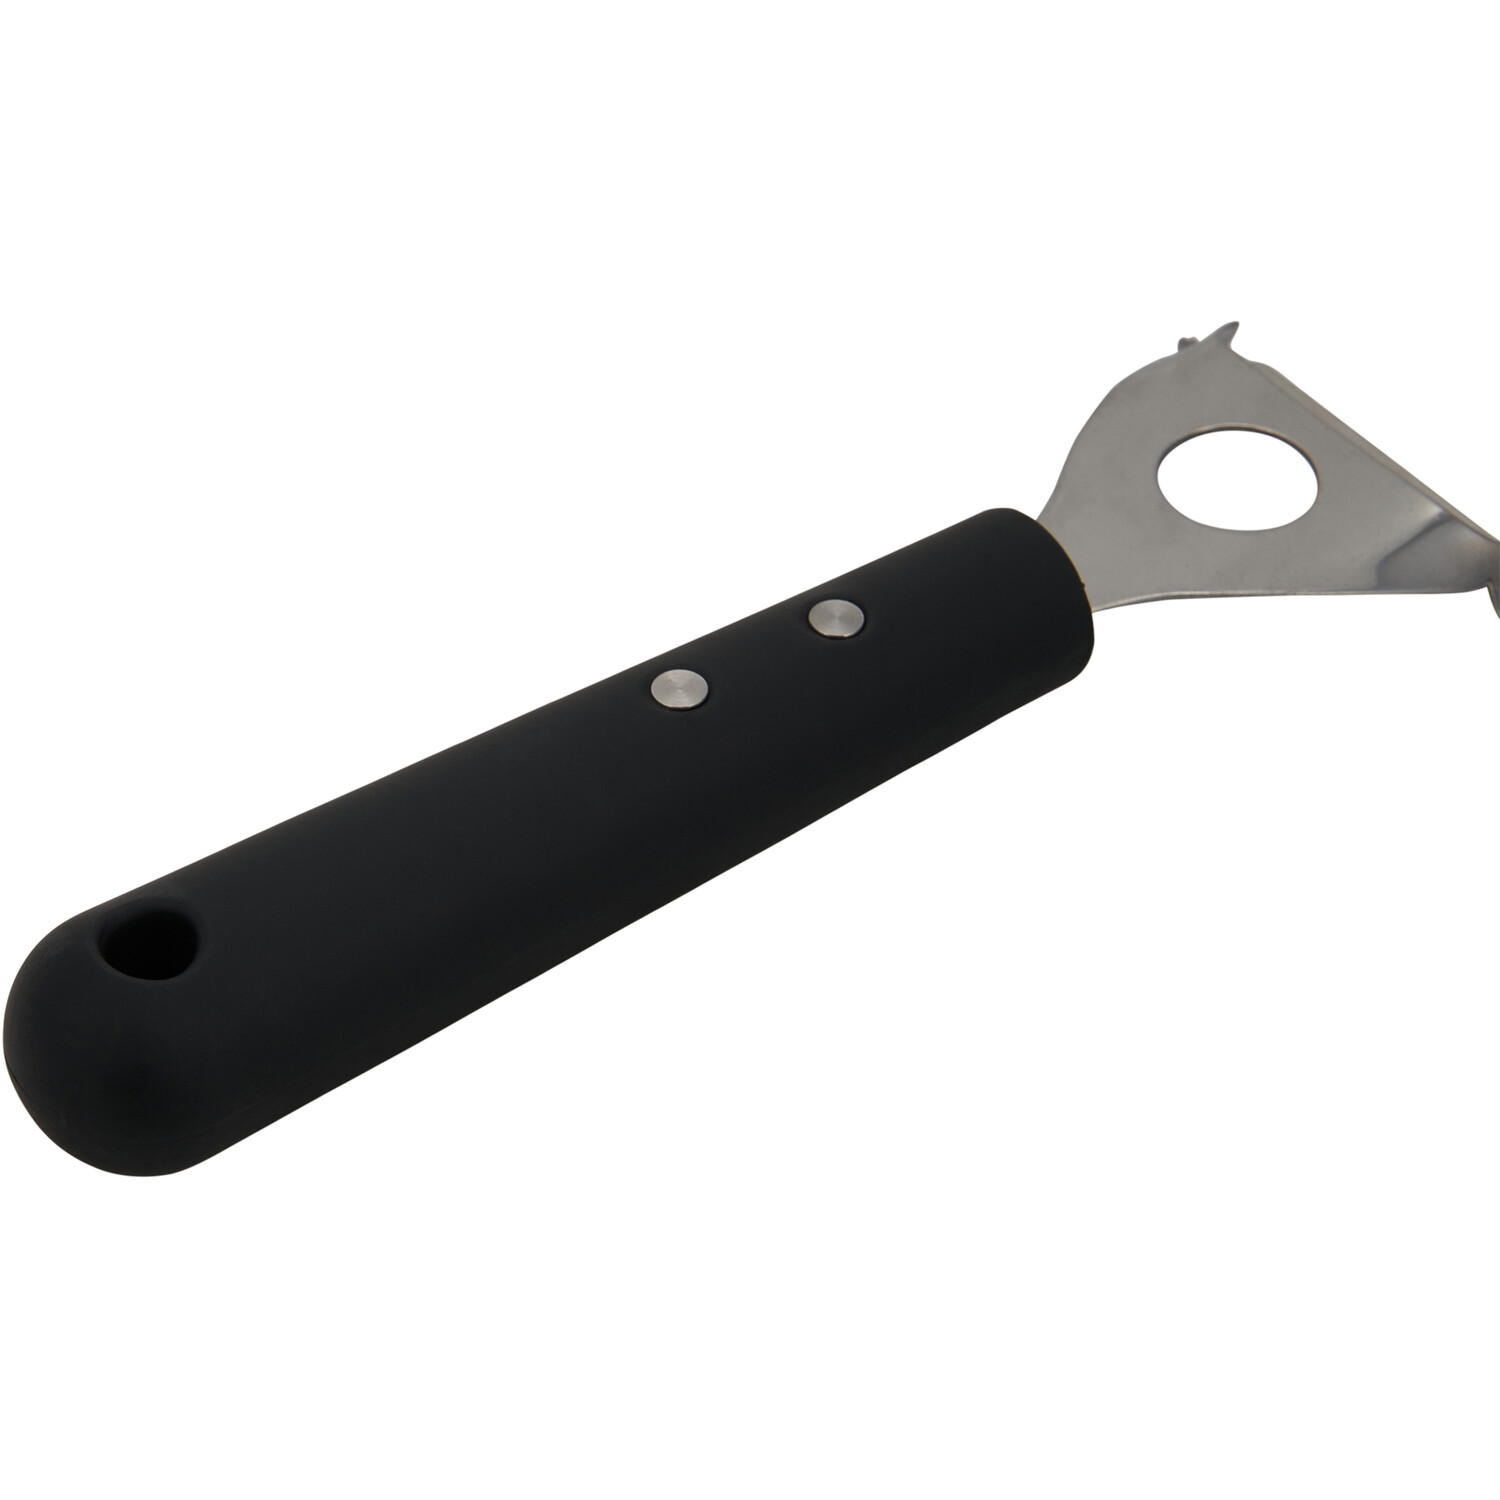 Kitchenmaster Y-Peeler with Soft Touch Handle - Black Image 3